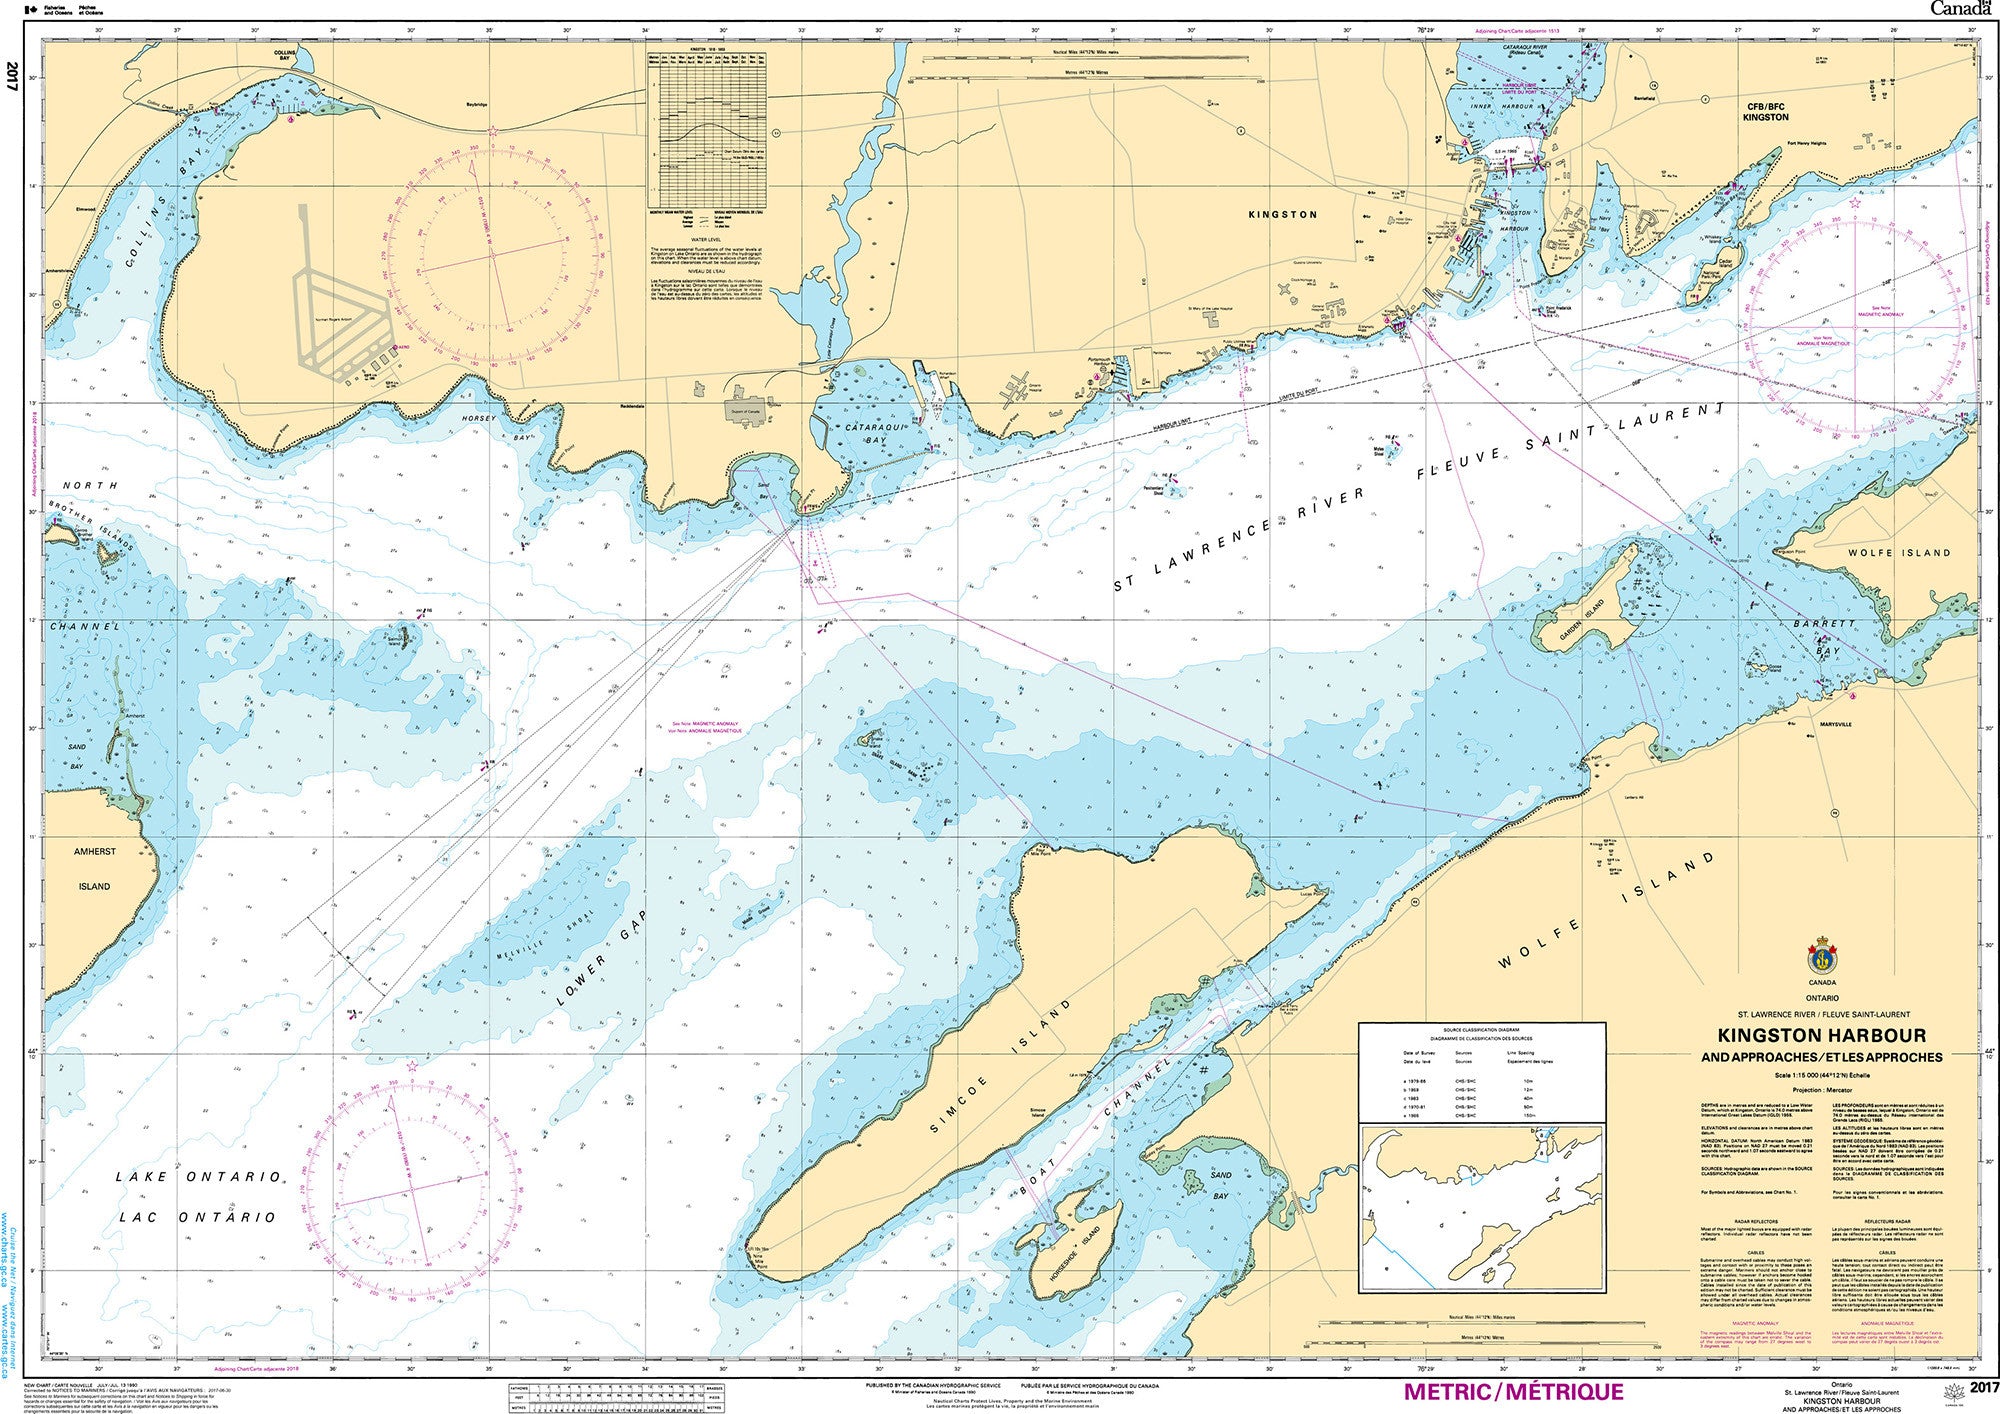 Canadian Hydrographic Service Nautical Chart CHS2017: Kingston Harbour and Approaches/et les approches